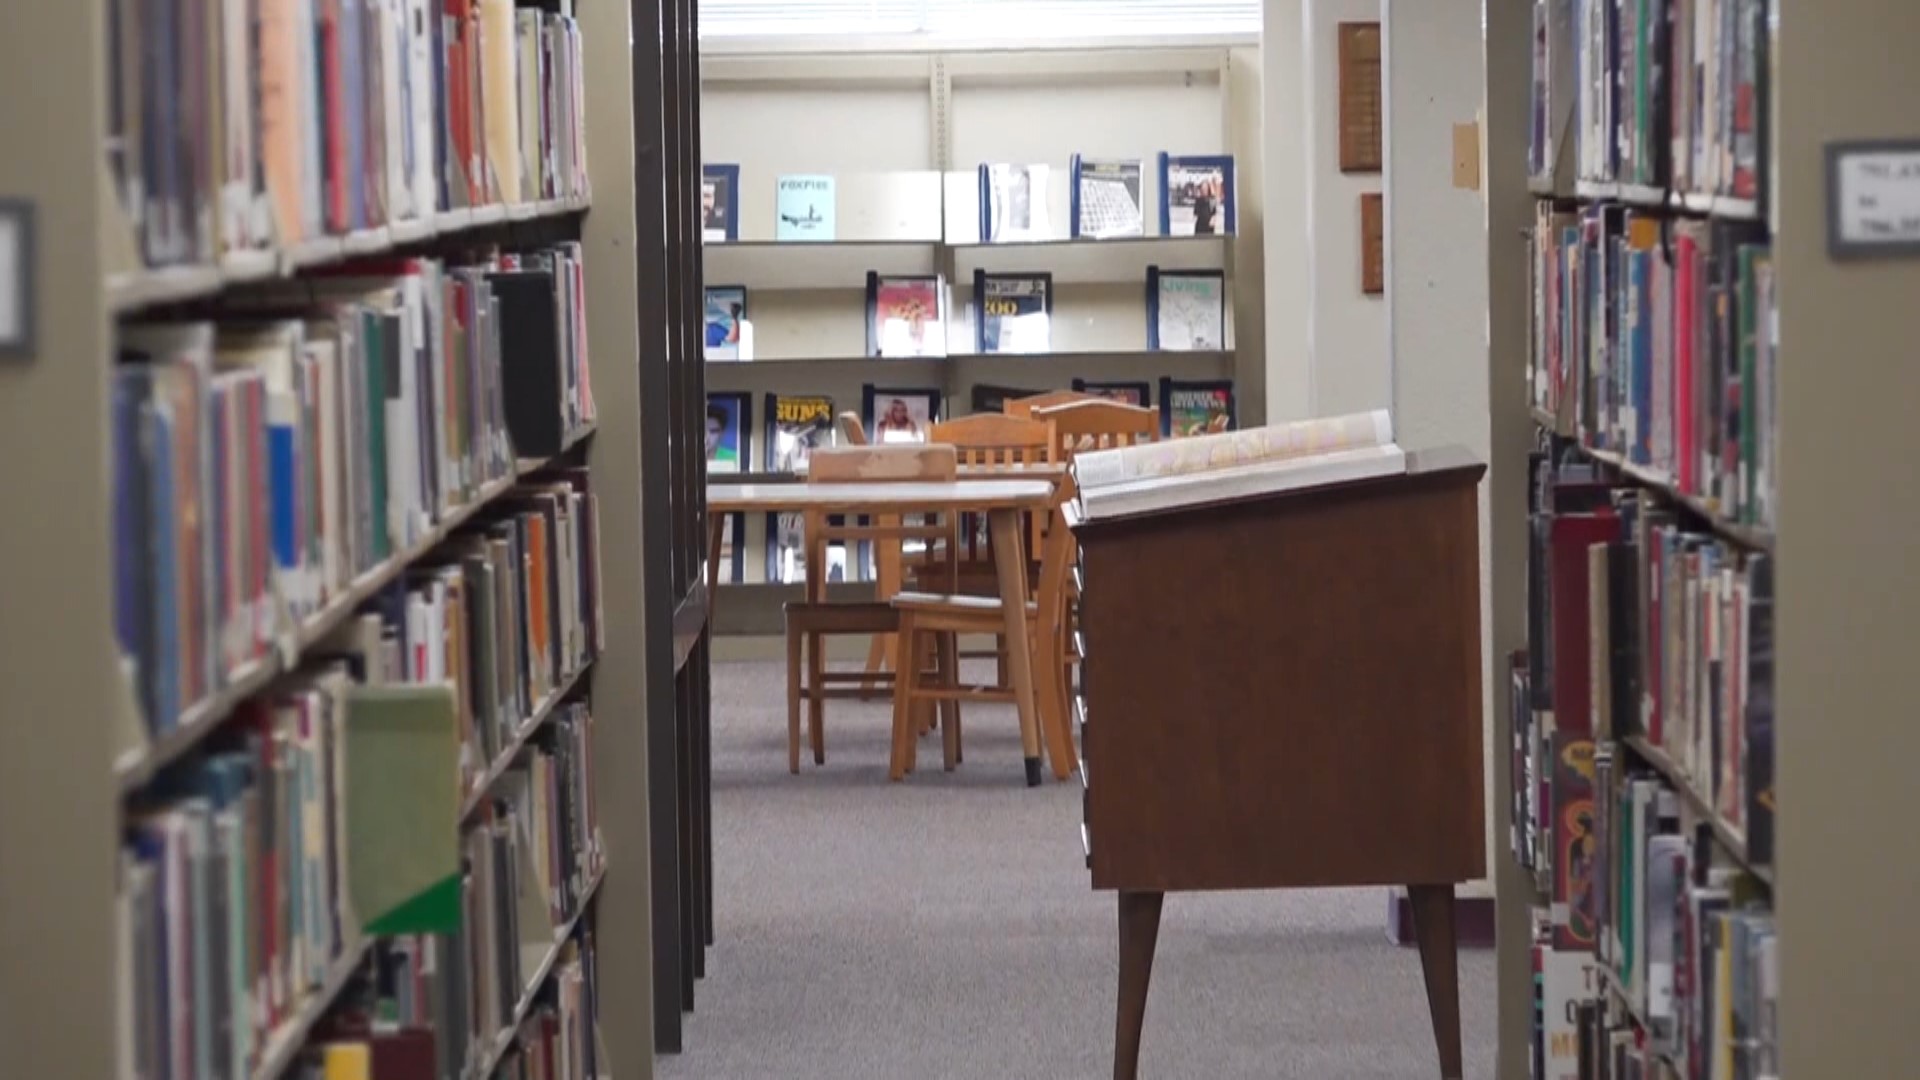 The Ector County Library will be ushering in new furniture, pods and even new book areas.